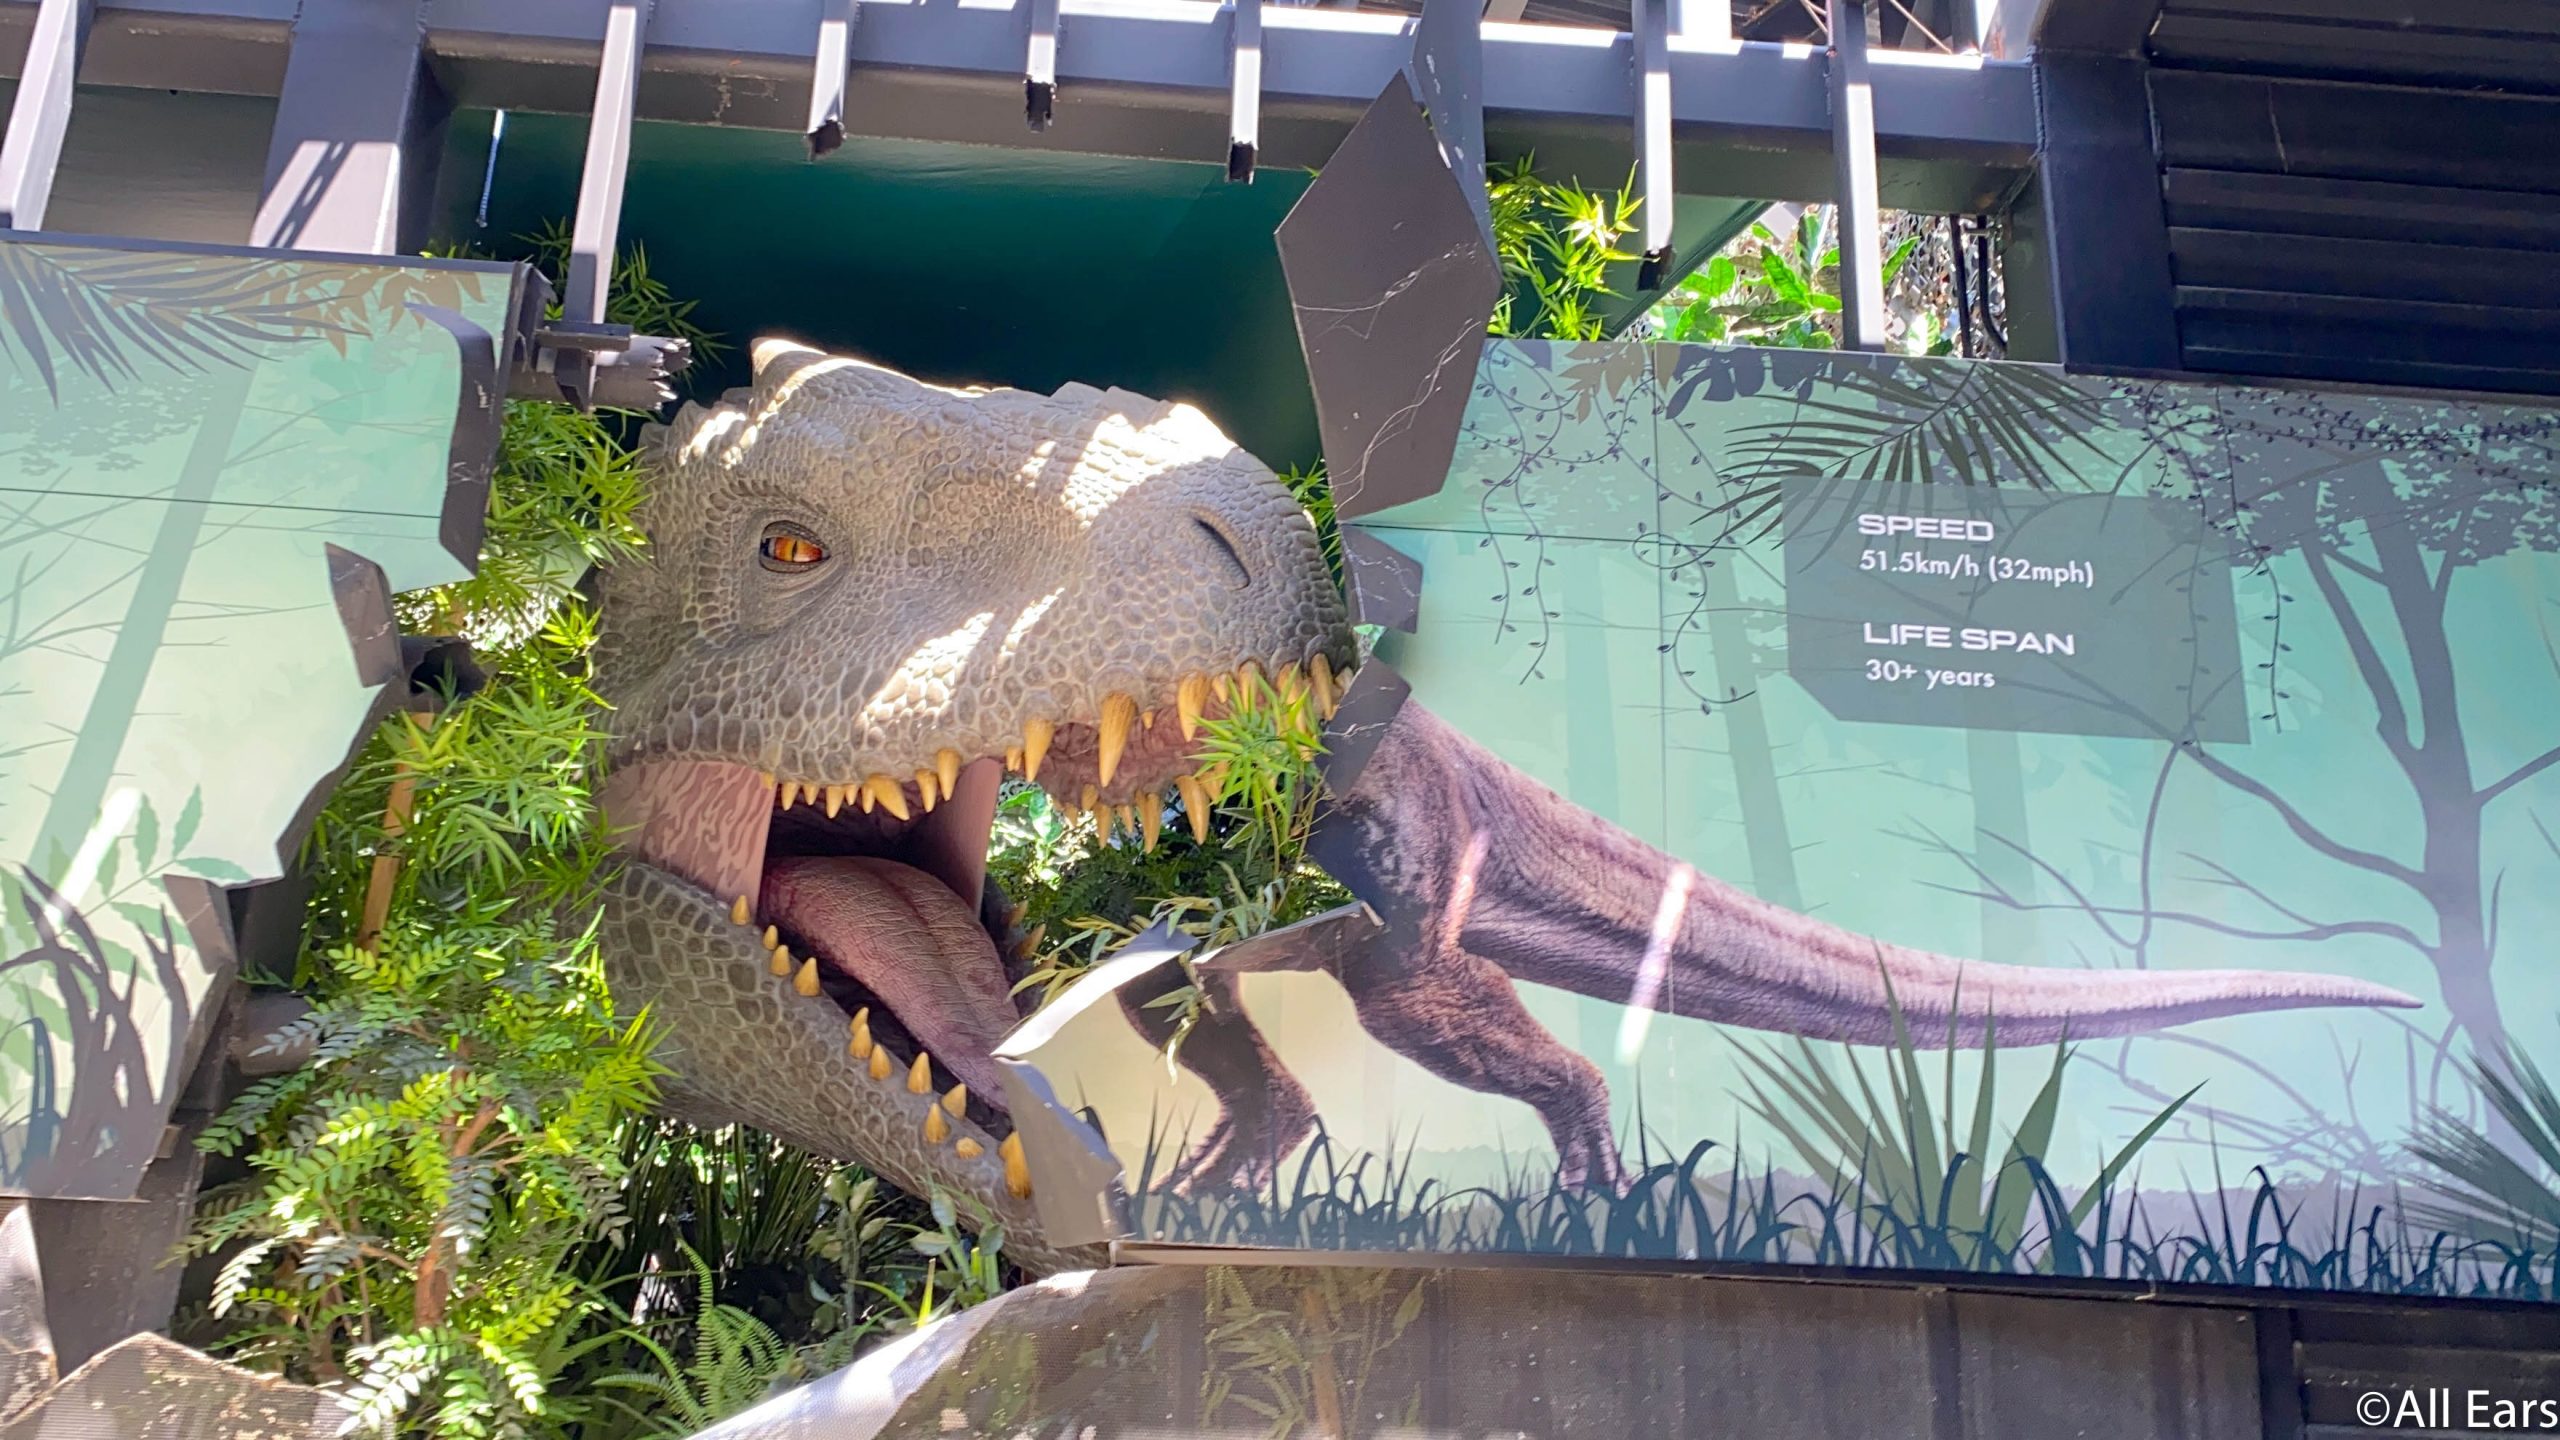 Jurassic World - The Ride now open at Universal Studios Hollywood